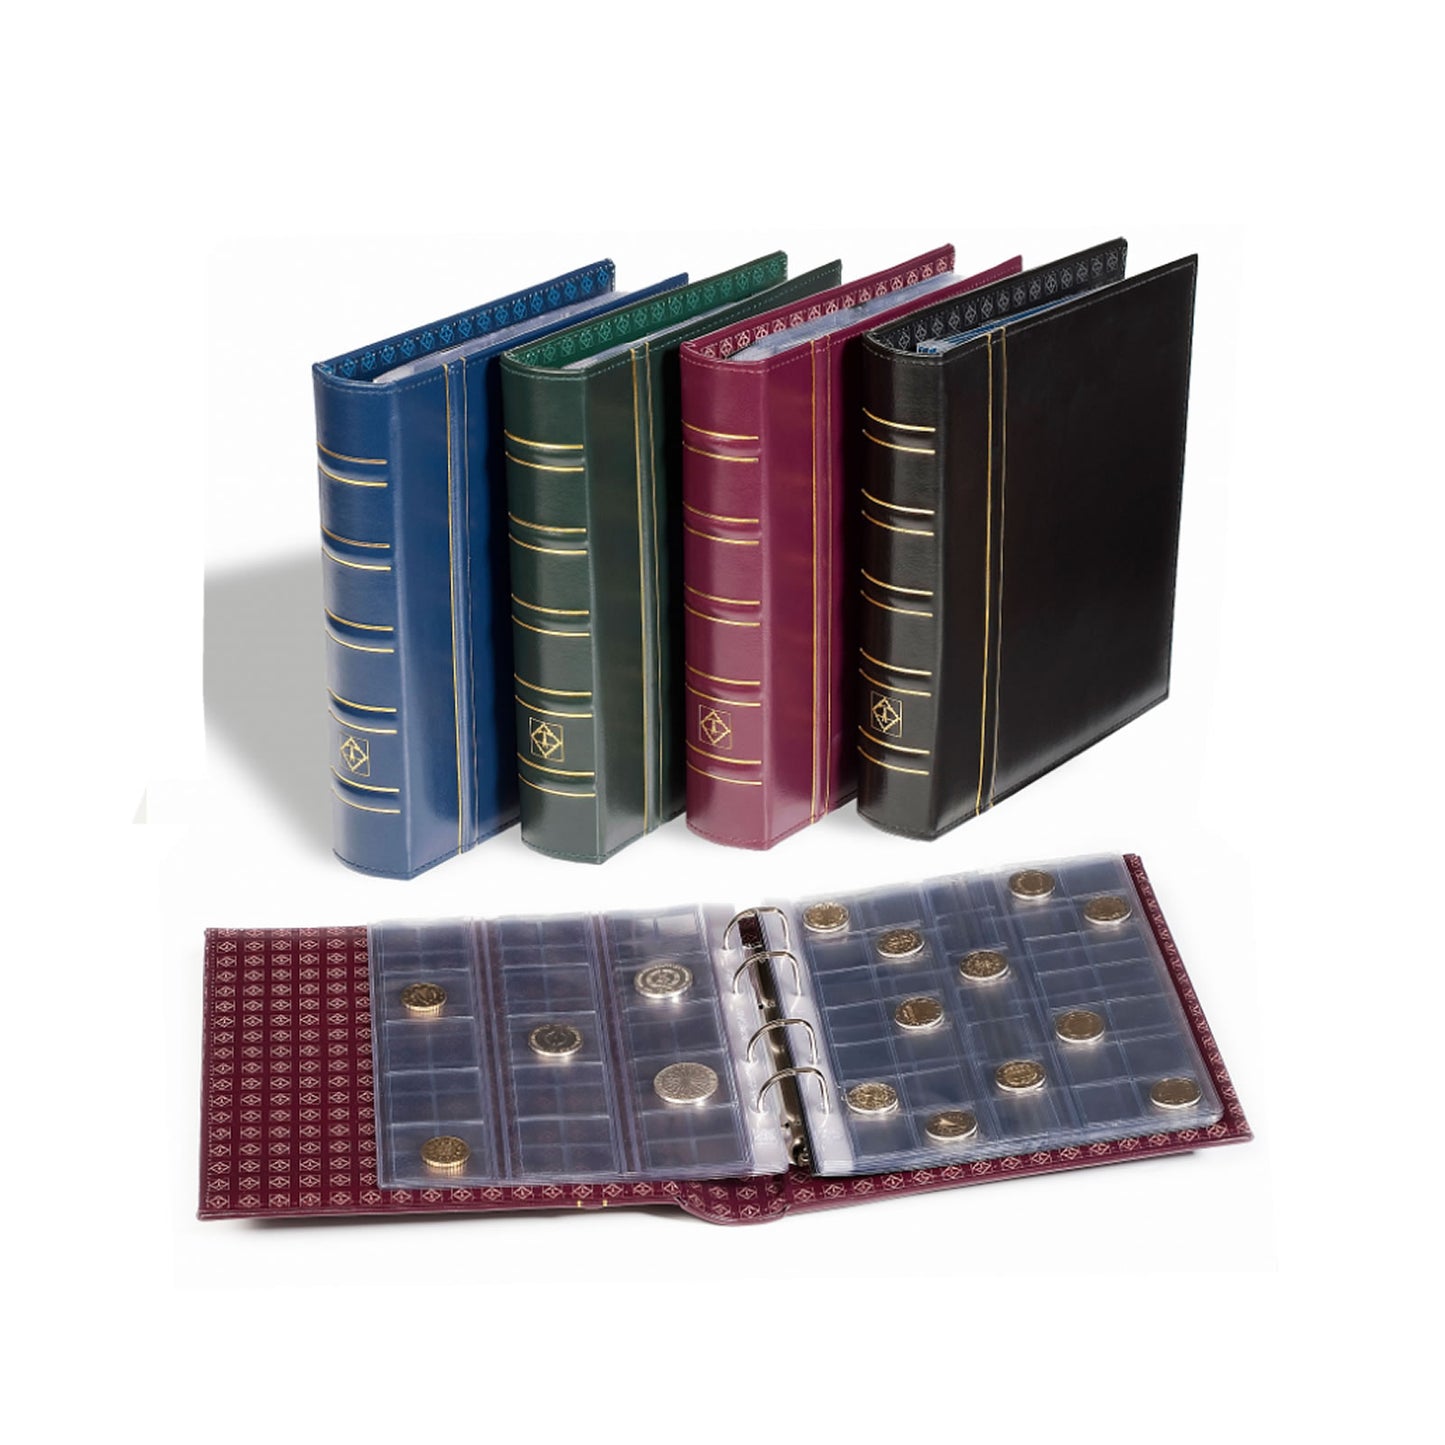 Lighthouse Classic Optima Coin Album With Slipcase & 10 Mixed Coin Pages - Green